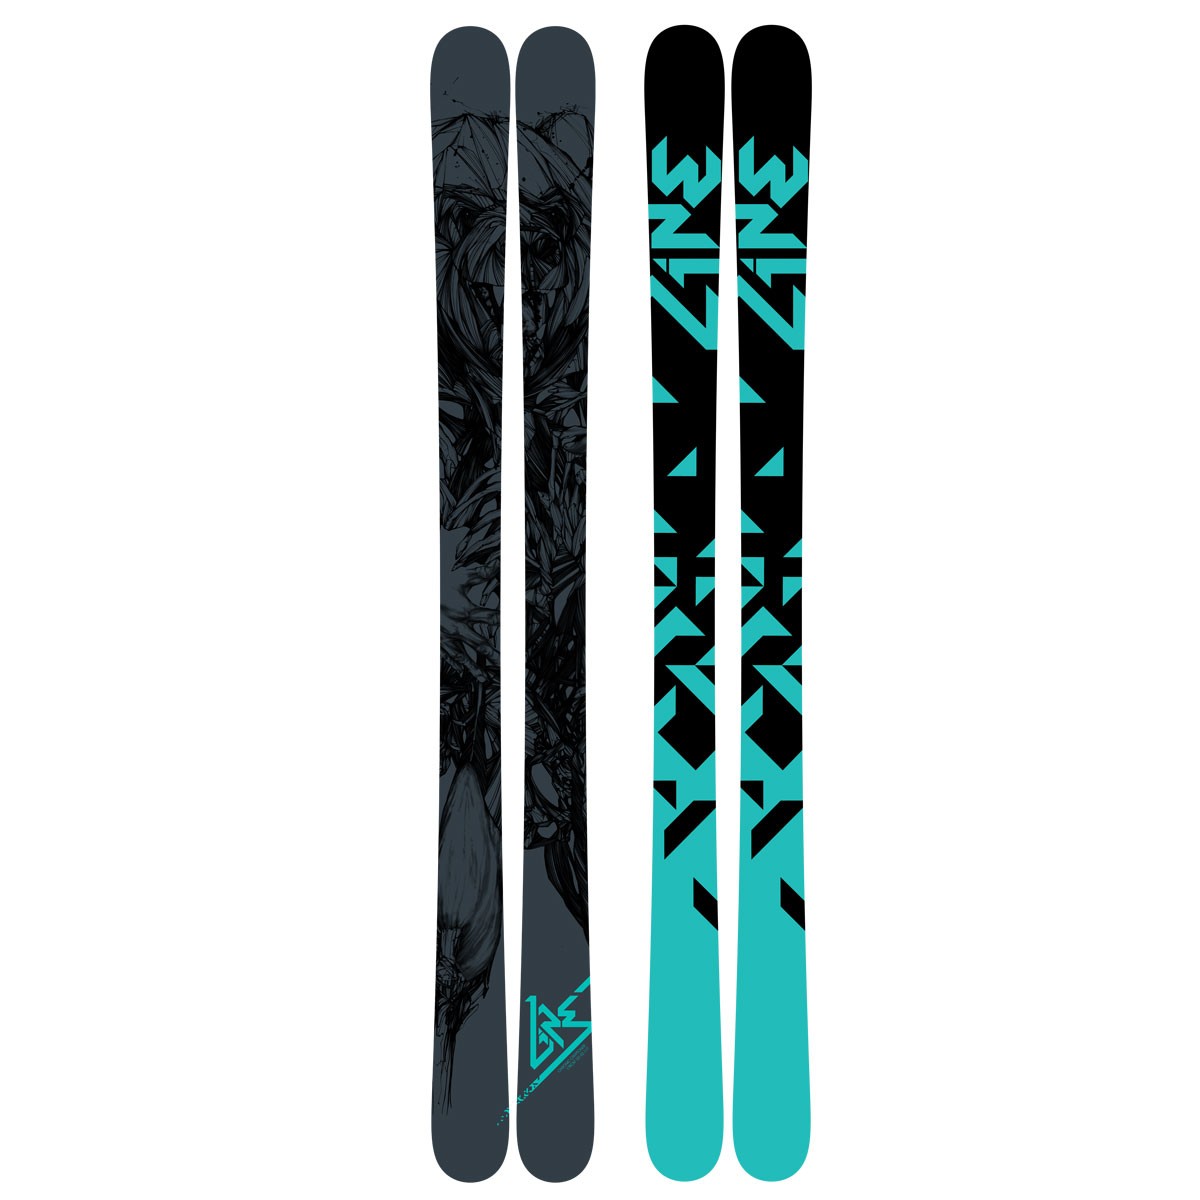 Line is one of the best brands in my opinion. Their skis are so tough that you can use the same skis for many seasons. The Chronic Cryptonites shred almost